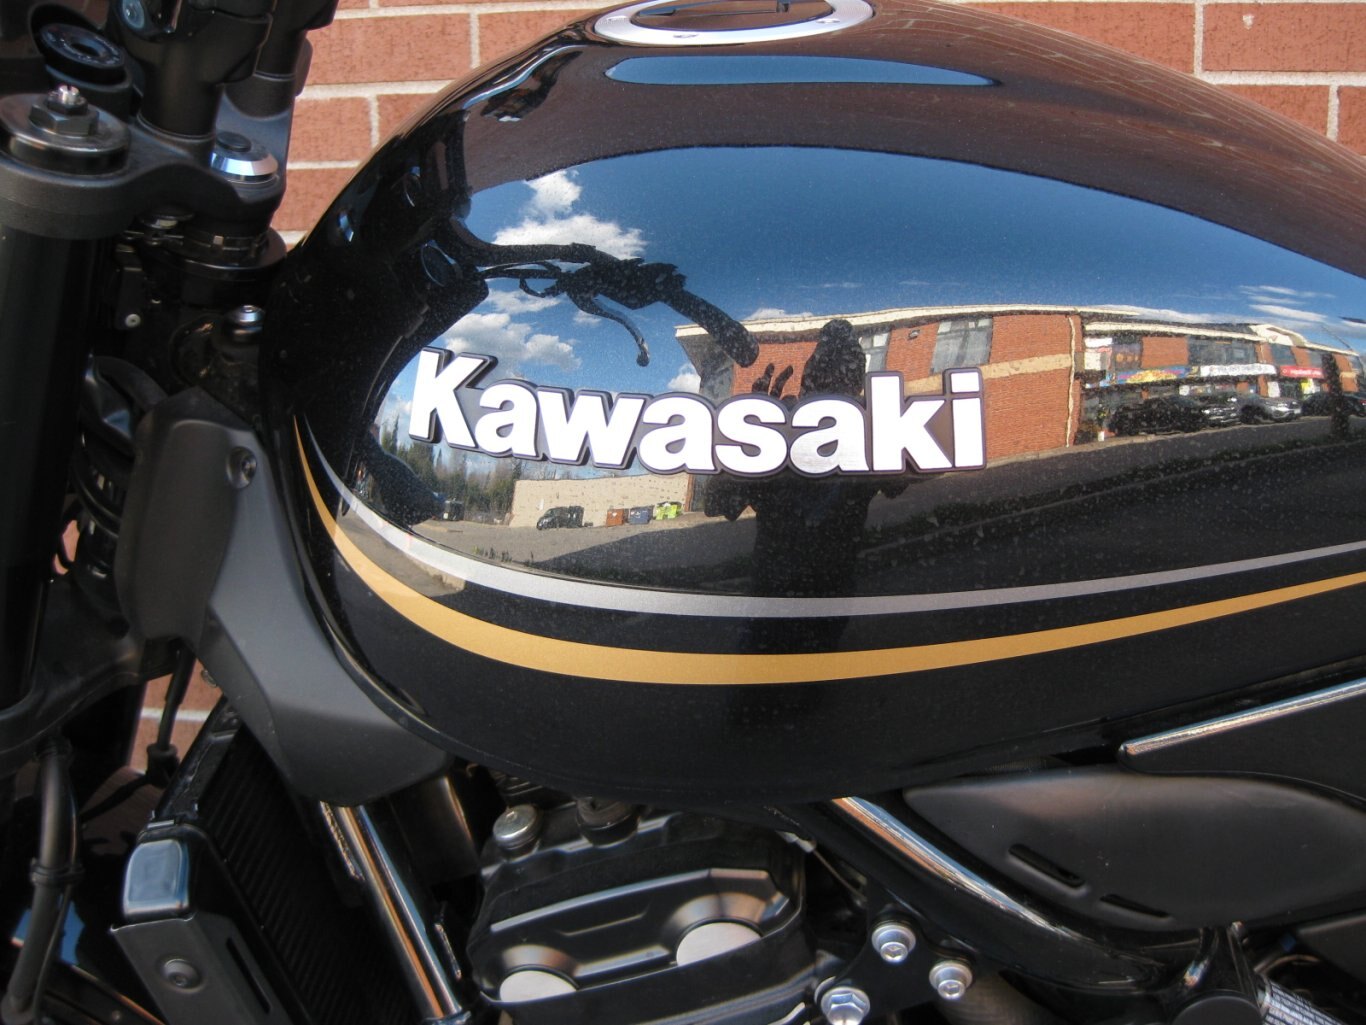 2018 Kawasaki Z900RS SOLD AND CONGRATULATIONS TO SIR VIKRANT!! YOU ARE “RIDIN” A TRULY ICONIC RETRO CLASSIC THE Z900RS – A TWO WHEEL FREEDOM MACHINE WITH THANKS FROM GARY & TEAM CYCLE WORLD!!!!